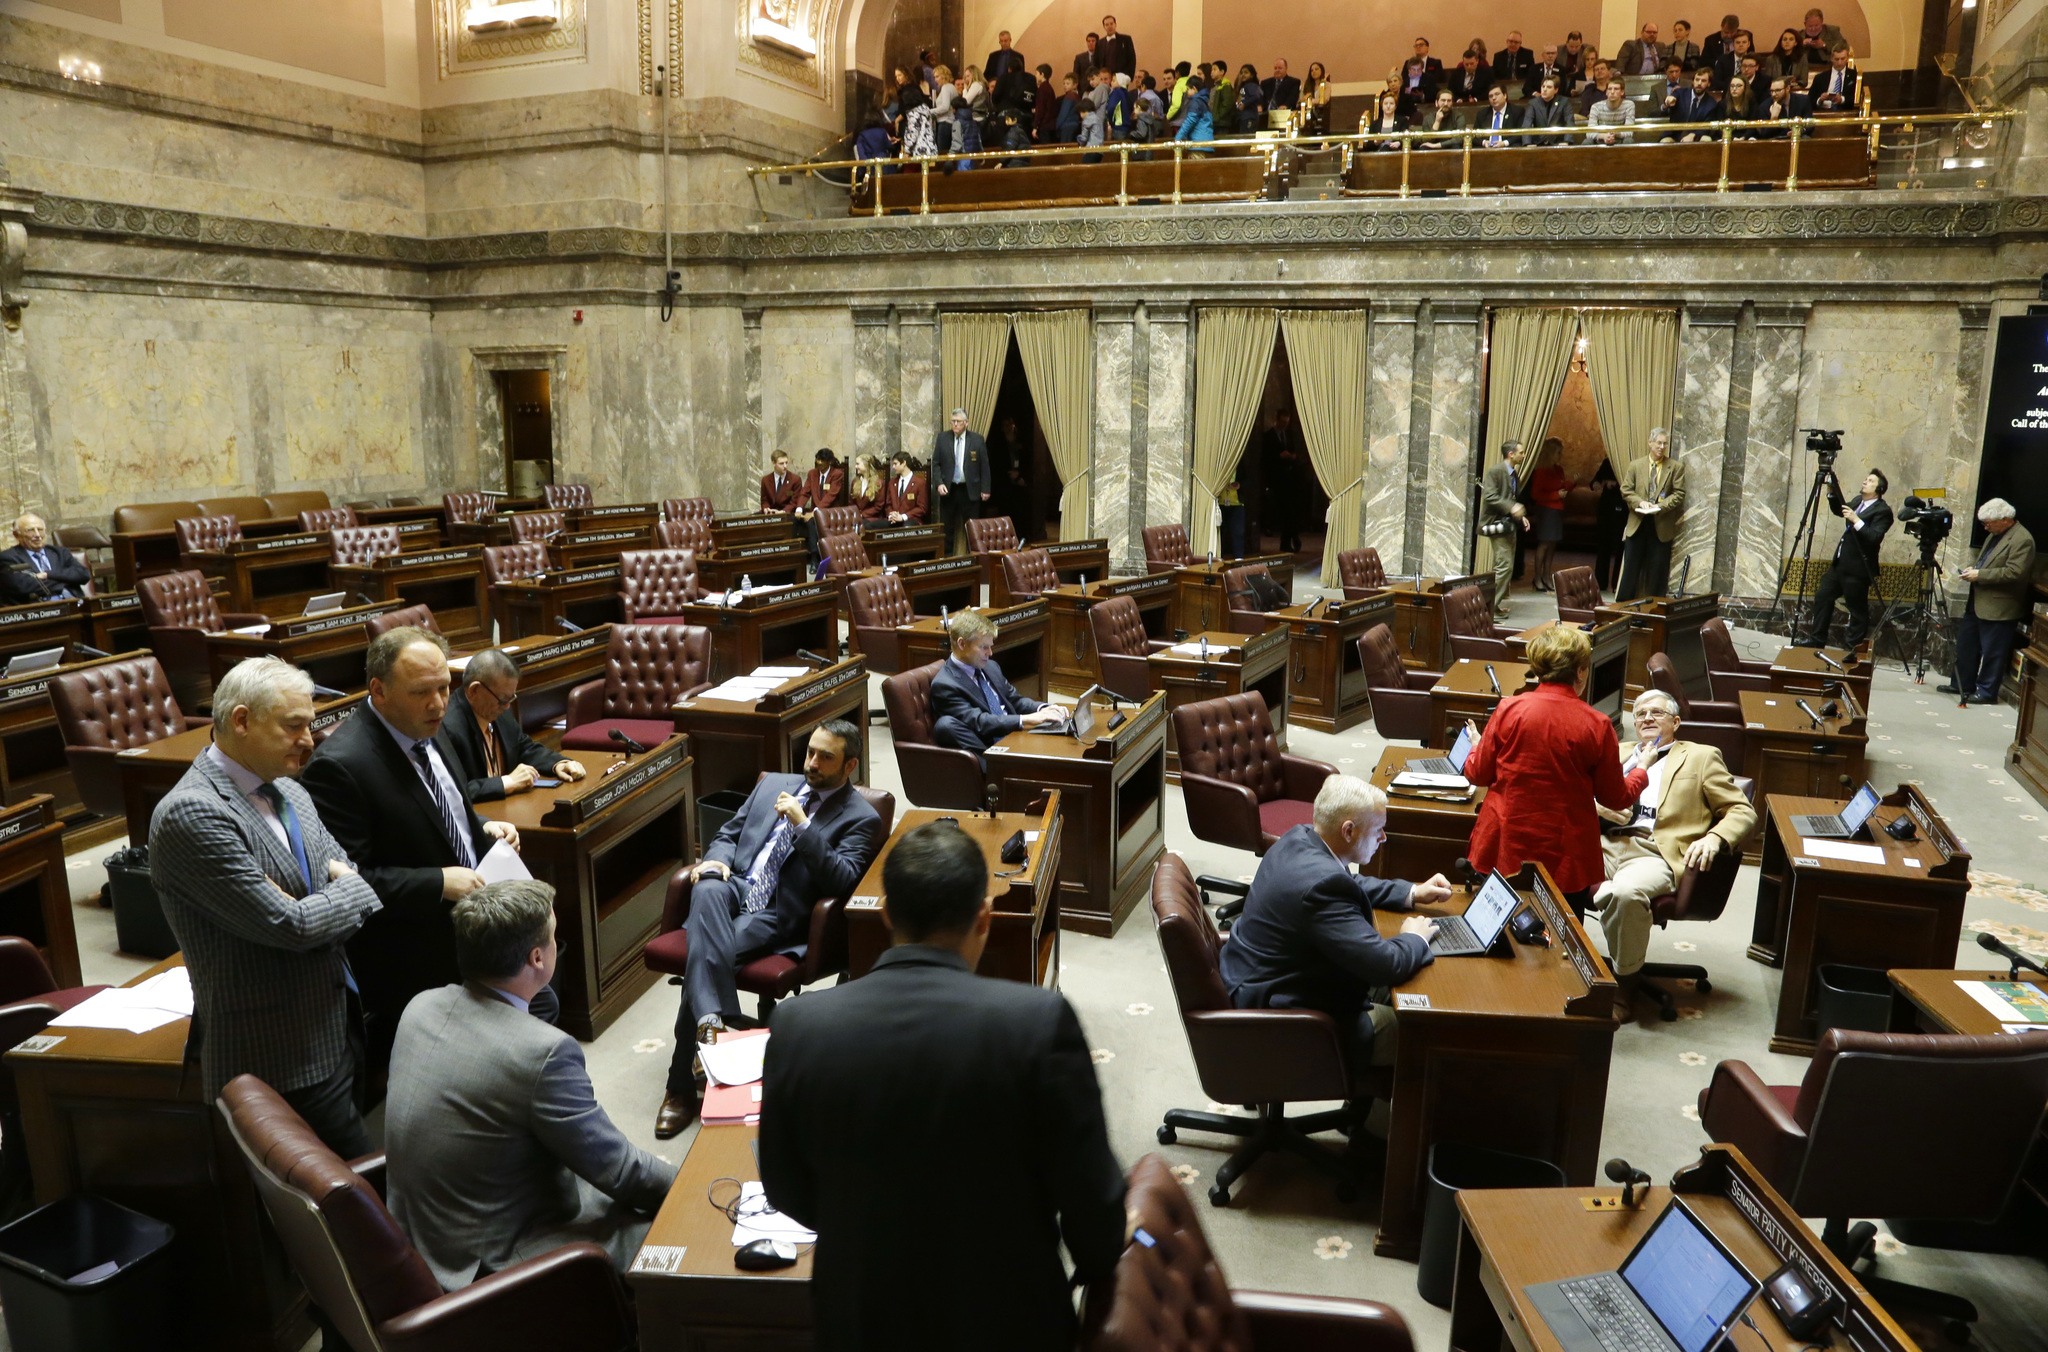 Democrats confer on the Senate floor as the Republican side sits empty during a recess Friday in Olympia. Senators were debating whether to vote on the “levy cliff” bill, which would delay a reduction in the amount of money school districts can collect though property taxes. (Ted S. Warren/The Associated Press)